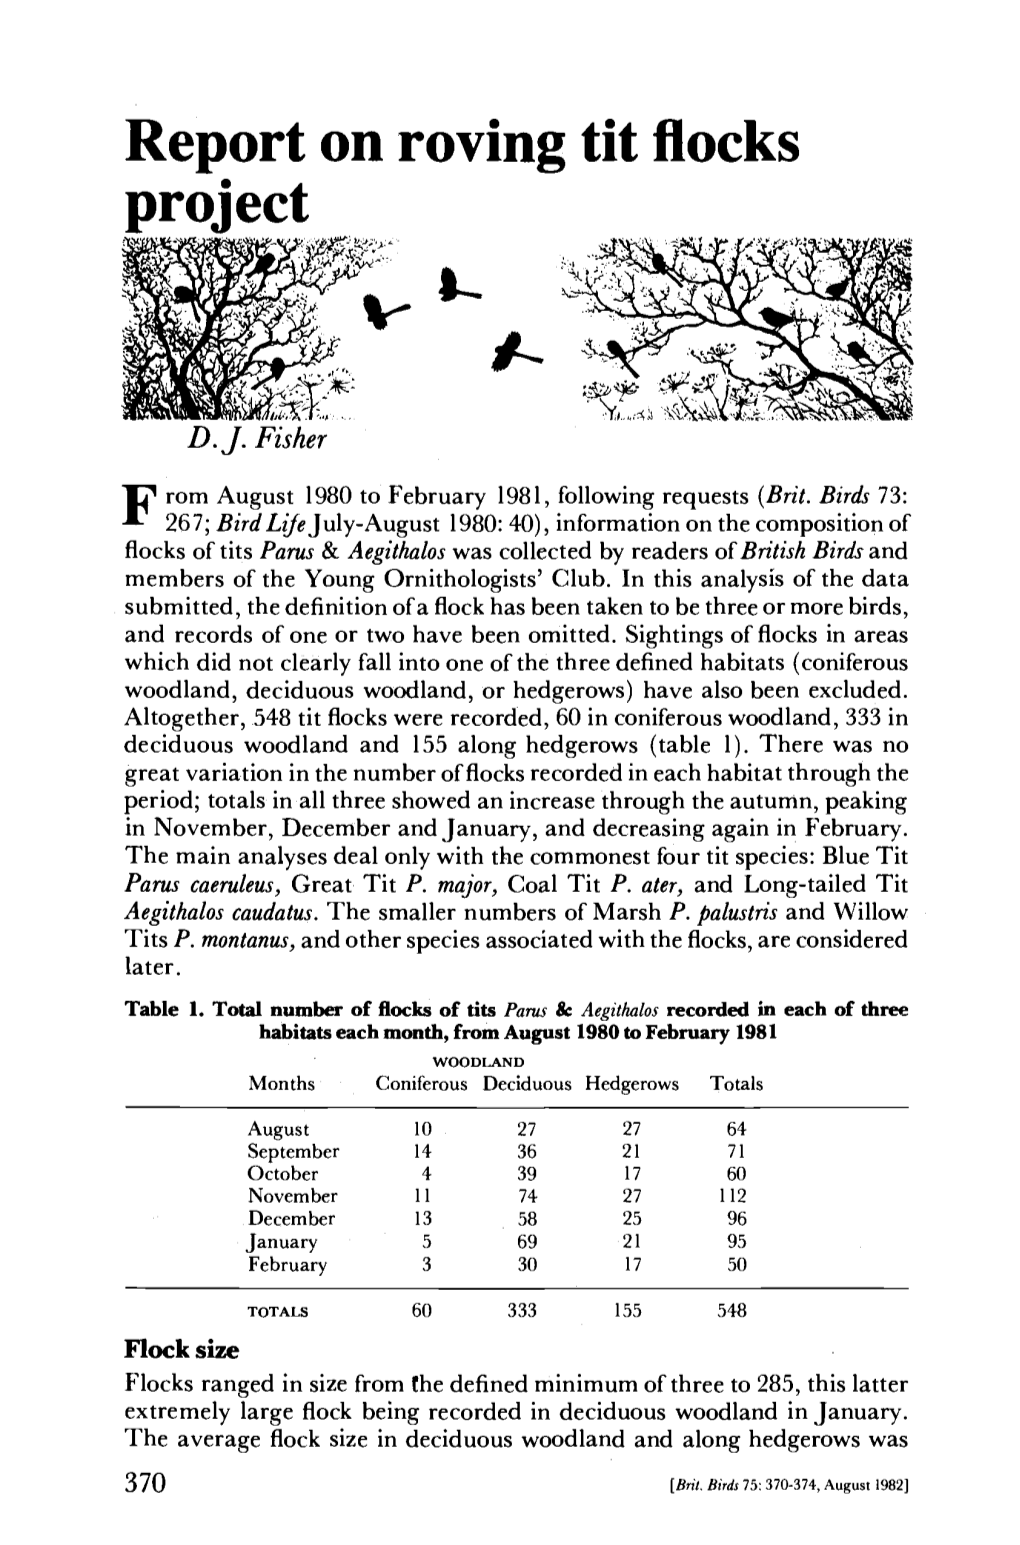 Report on Roving Tit Flocks Project